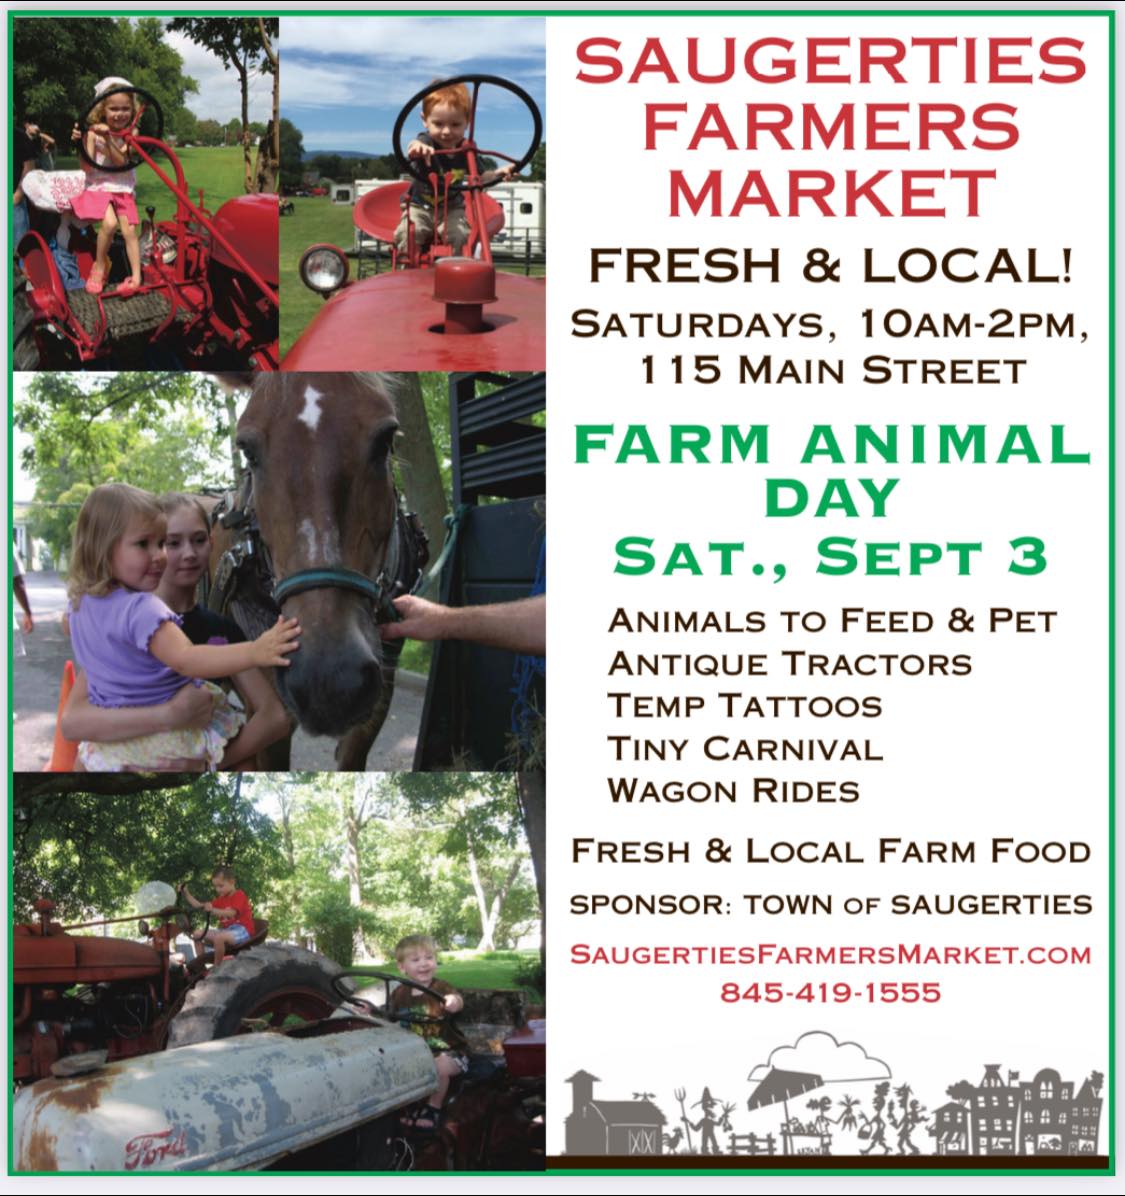 Saugerties Farmers Market Farm Animal Day | Ulster County NY Tourism